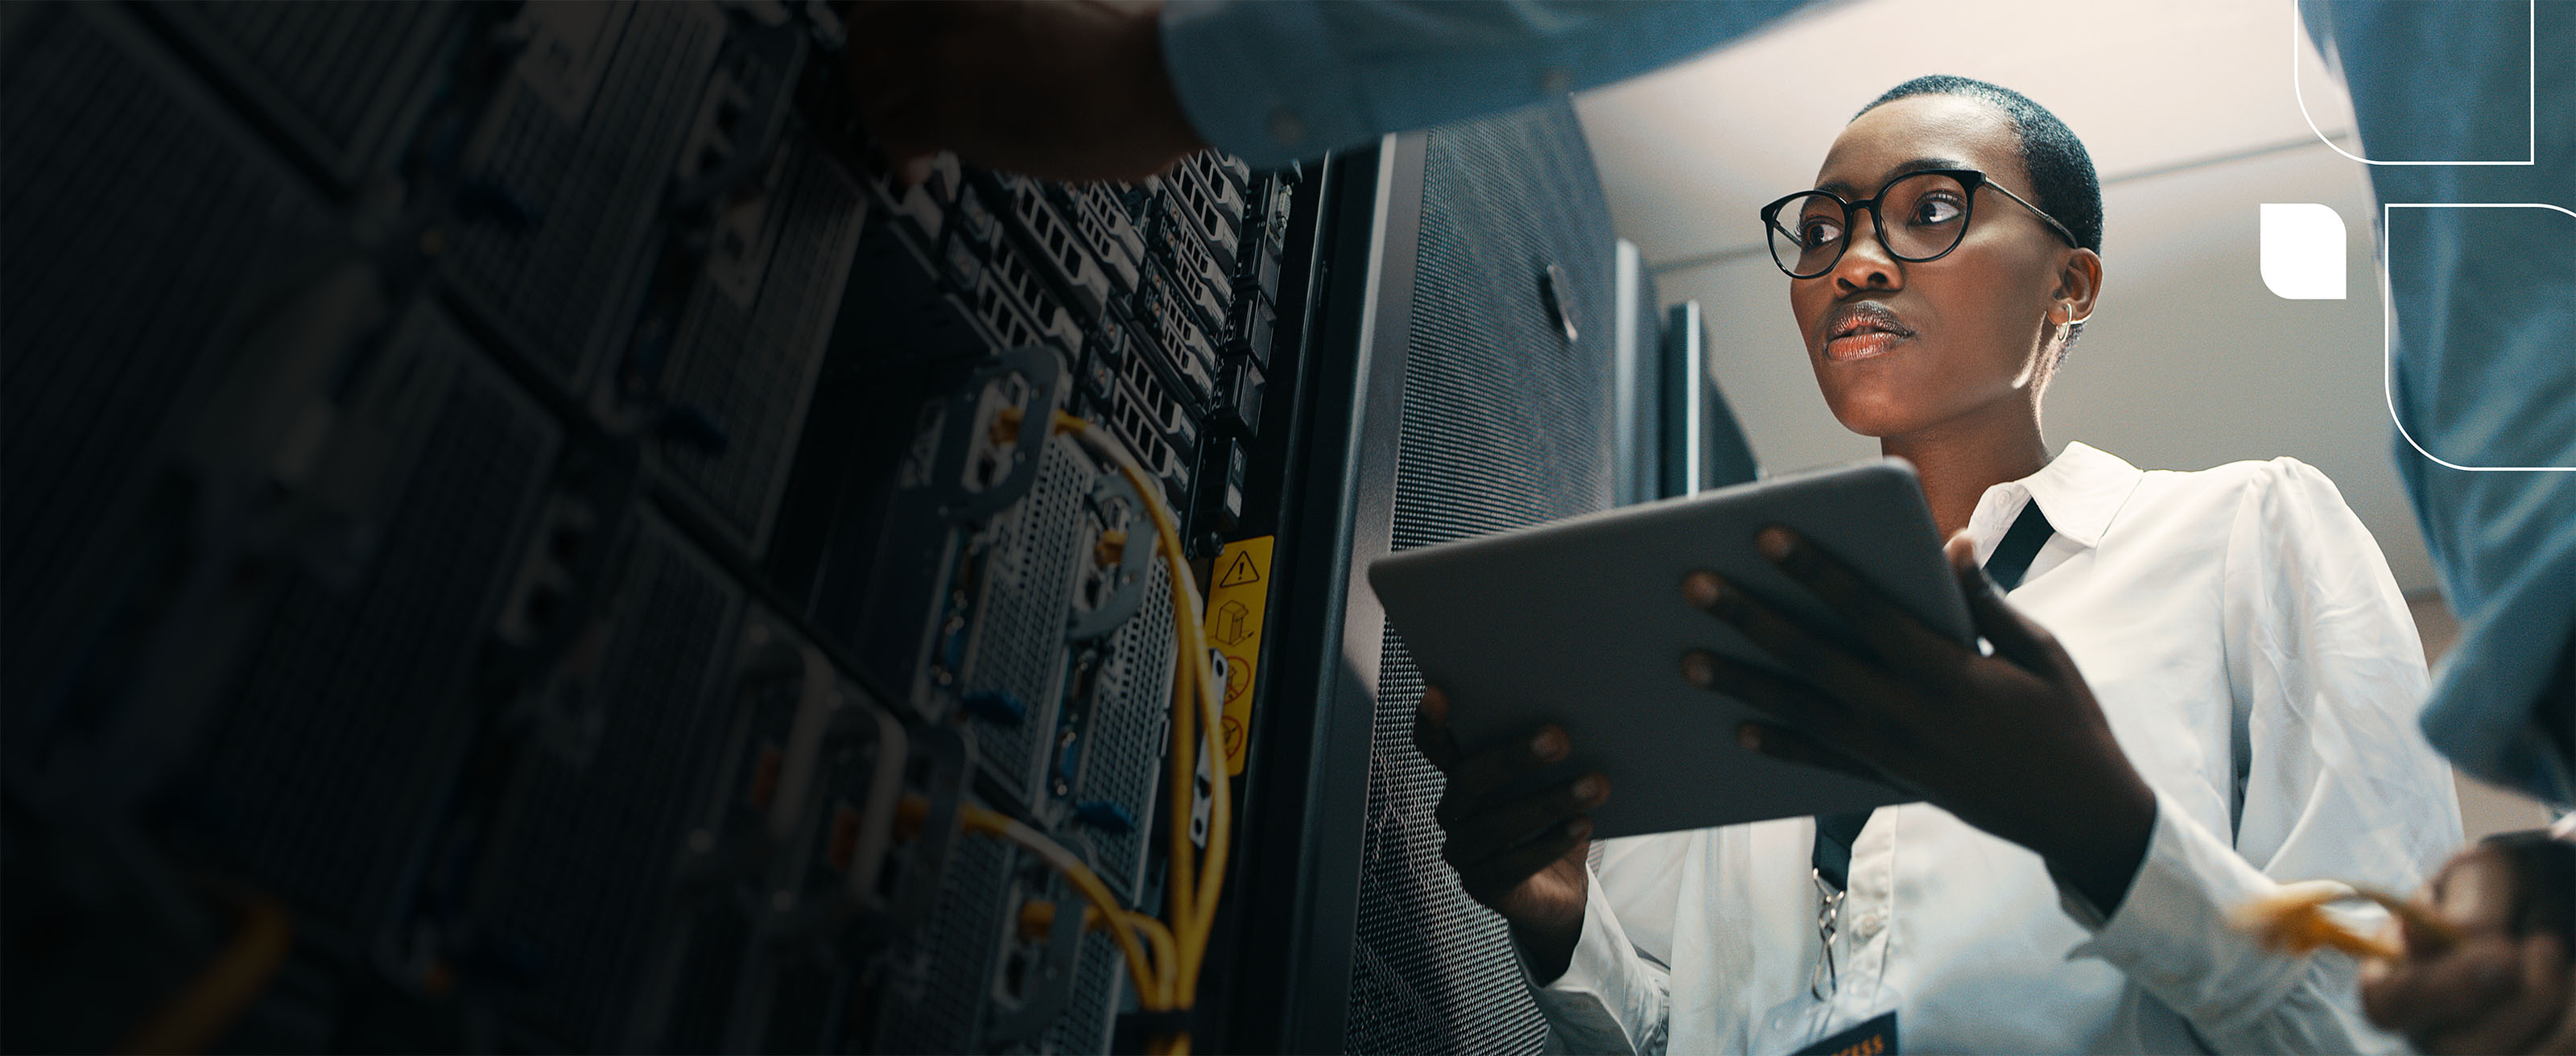 Prove your expertise in essential cybersecurity skills, concepts, and technologies, including security monitoring, analysis, and response. Launch your career in cyber operations with the Cisco Certified CyberOps Associate certification.